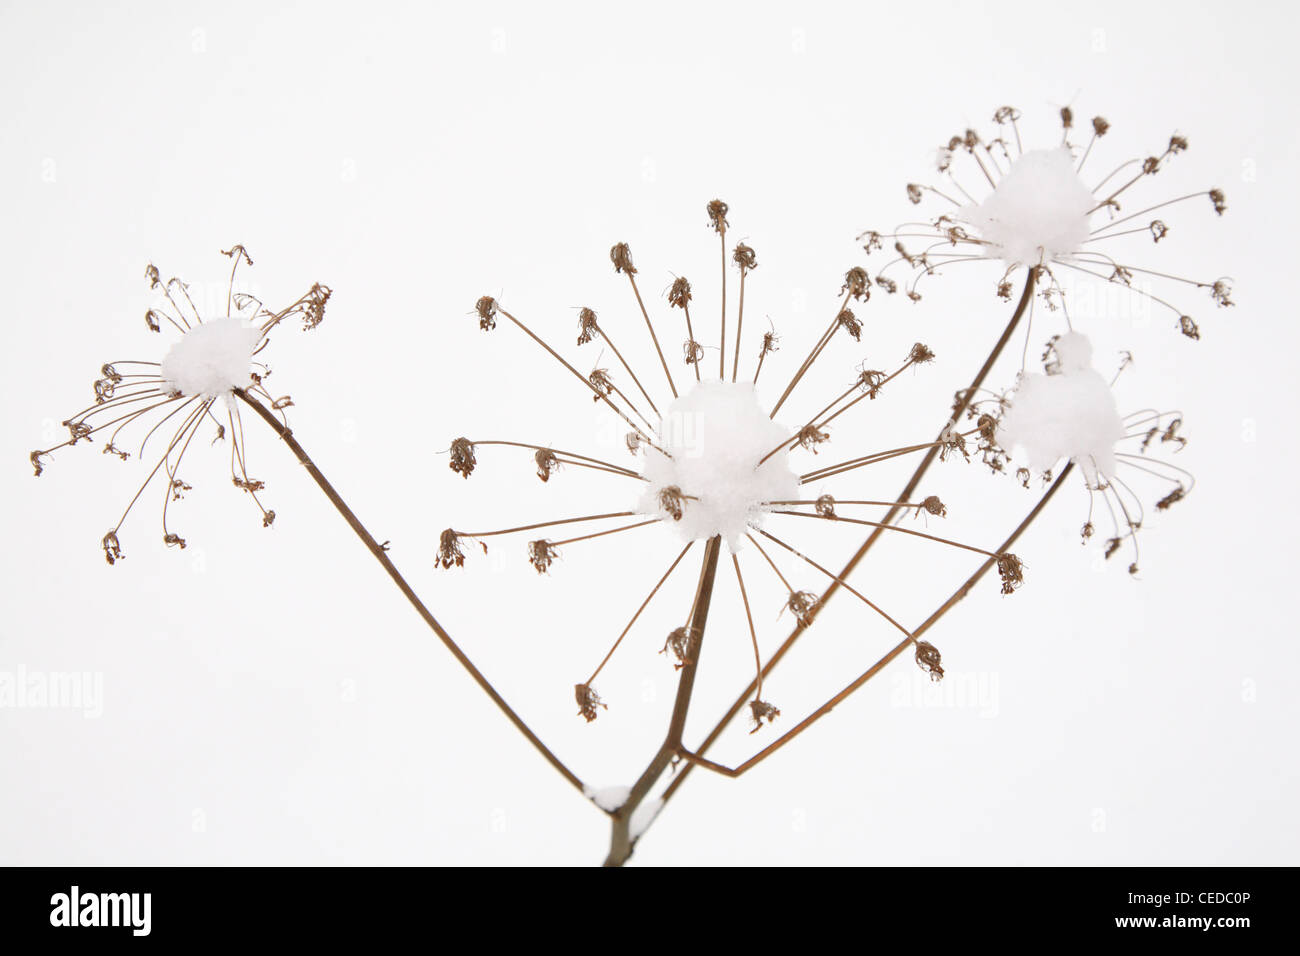 Dry snow-covered umbellate plant Stock Photo